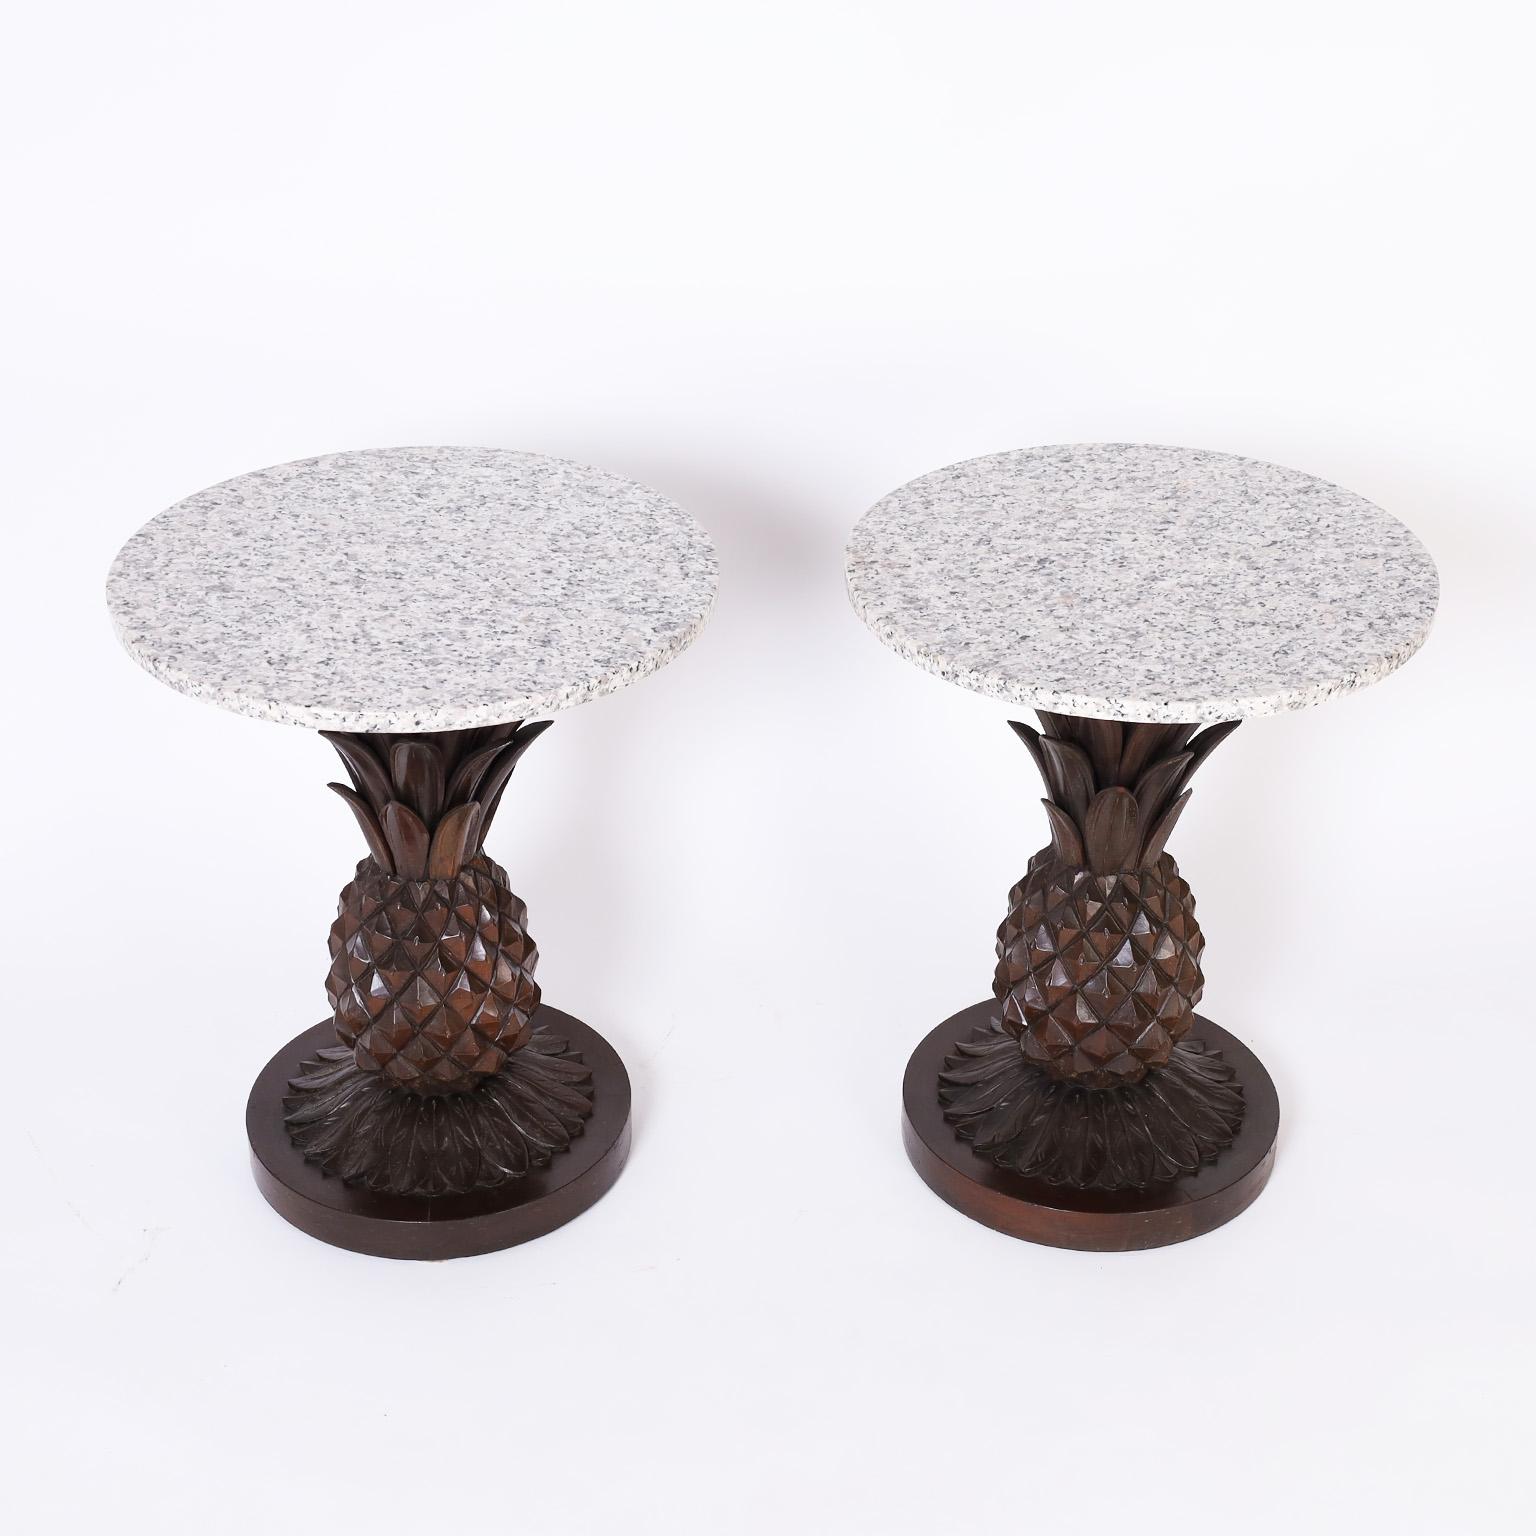 Mid century round marble top stands featuring conspicuous carved mahogany stylized pineapples over leaves on round wood bases.